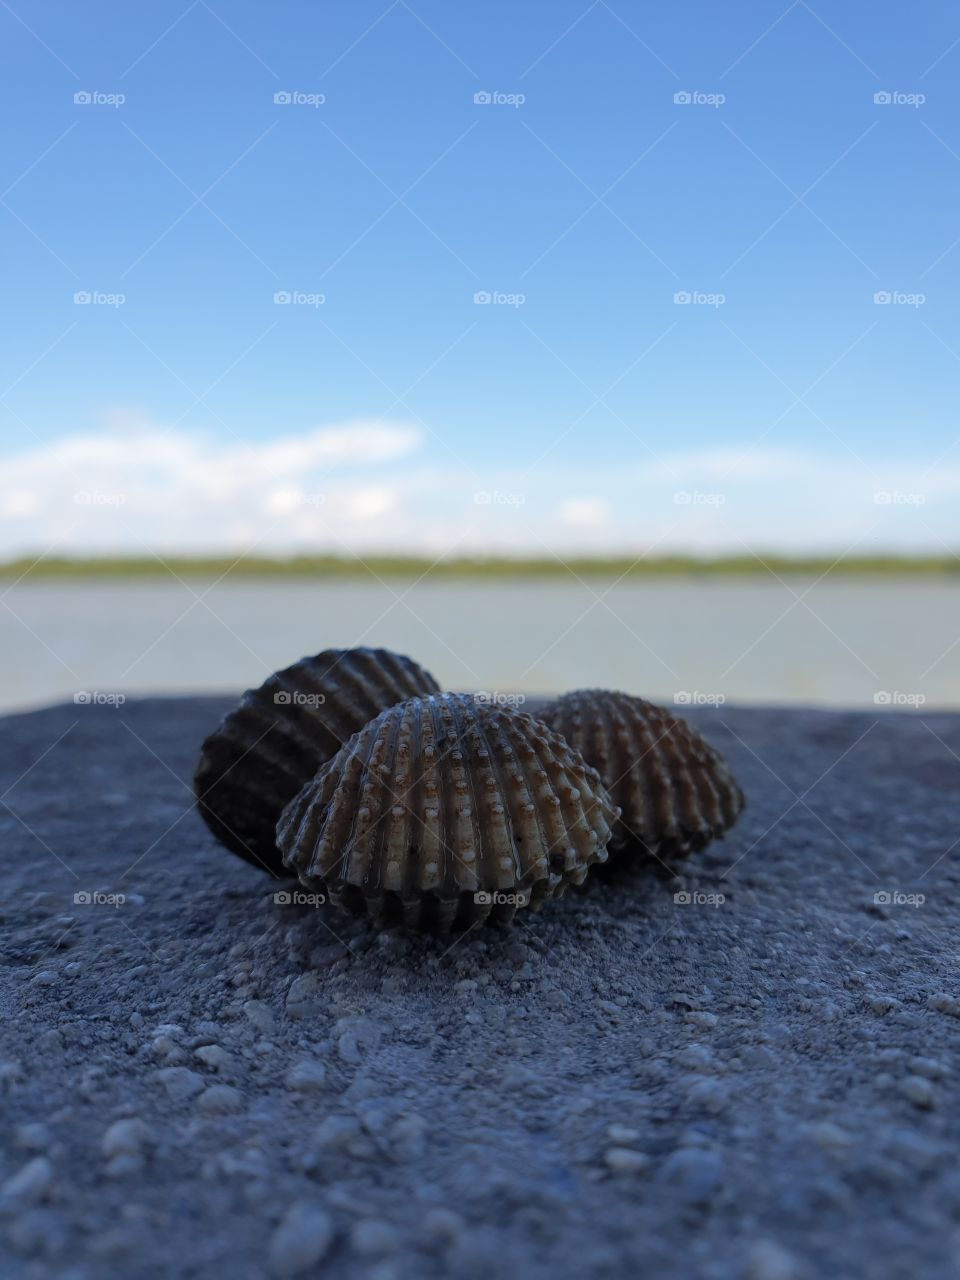 sea shell on the stone